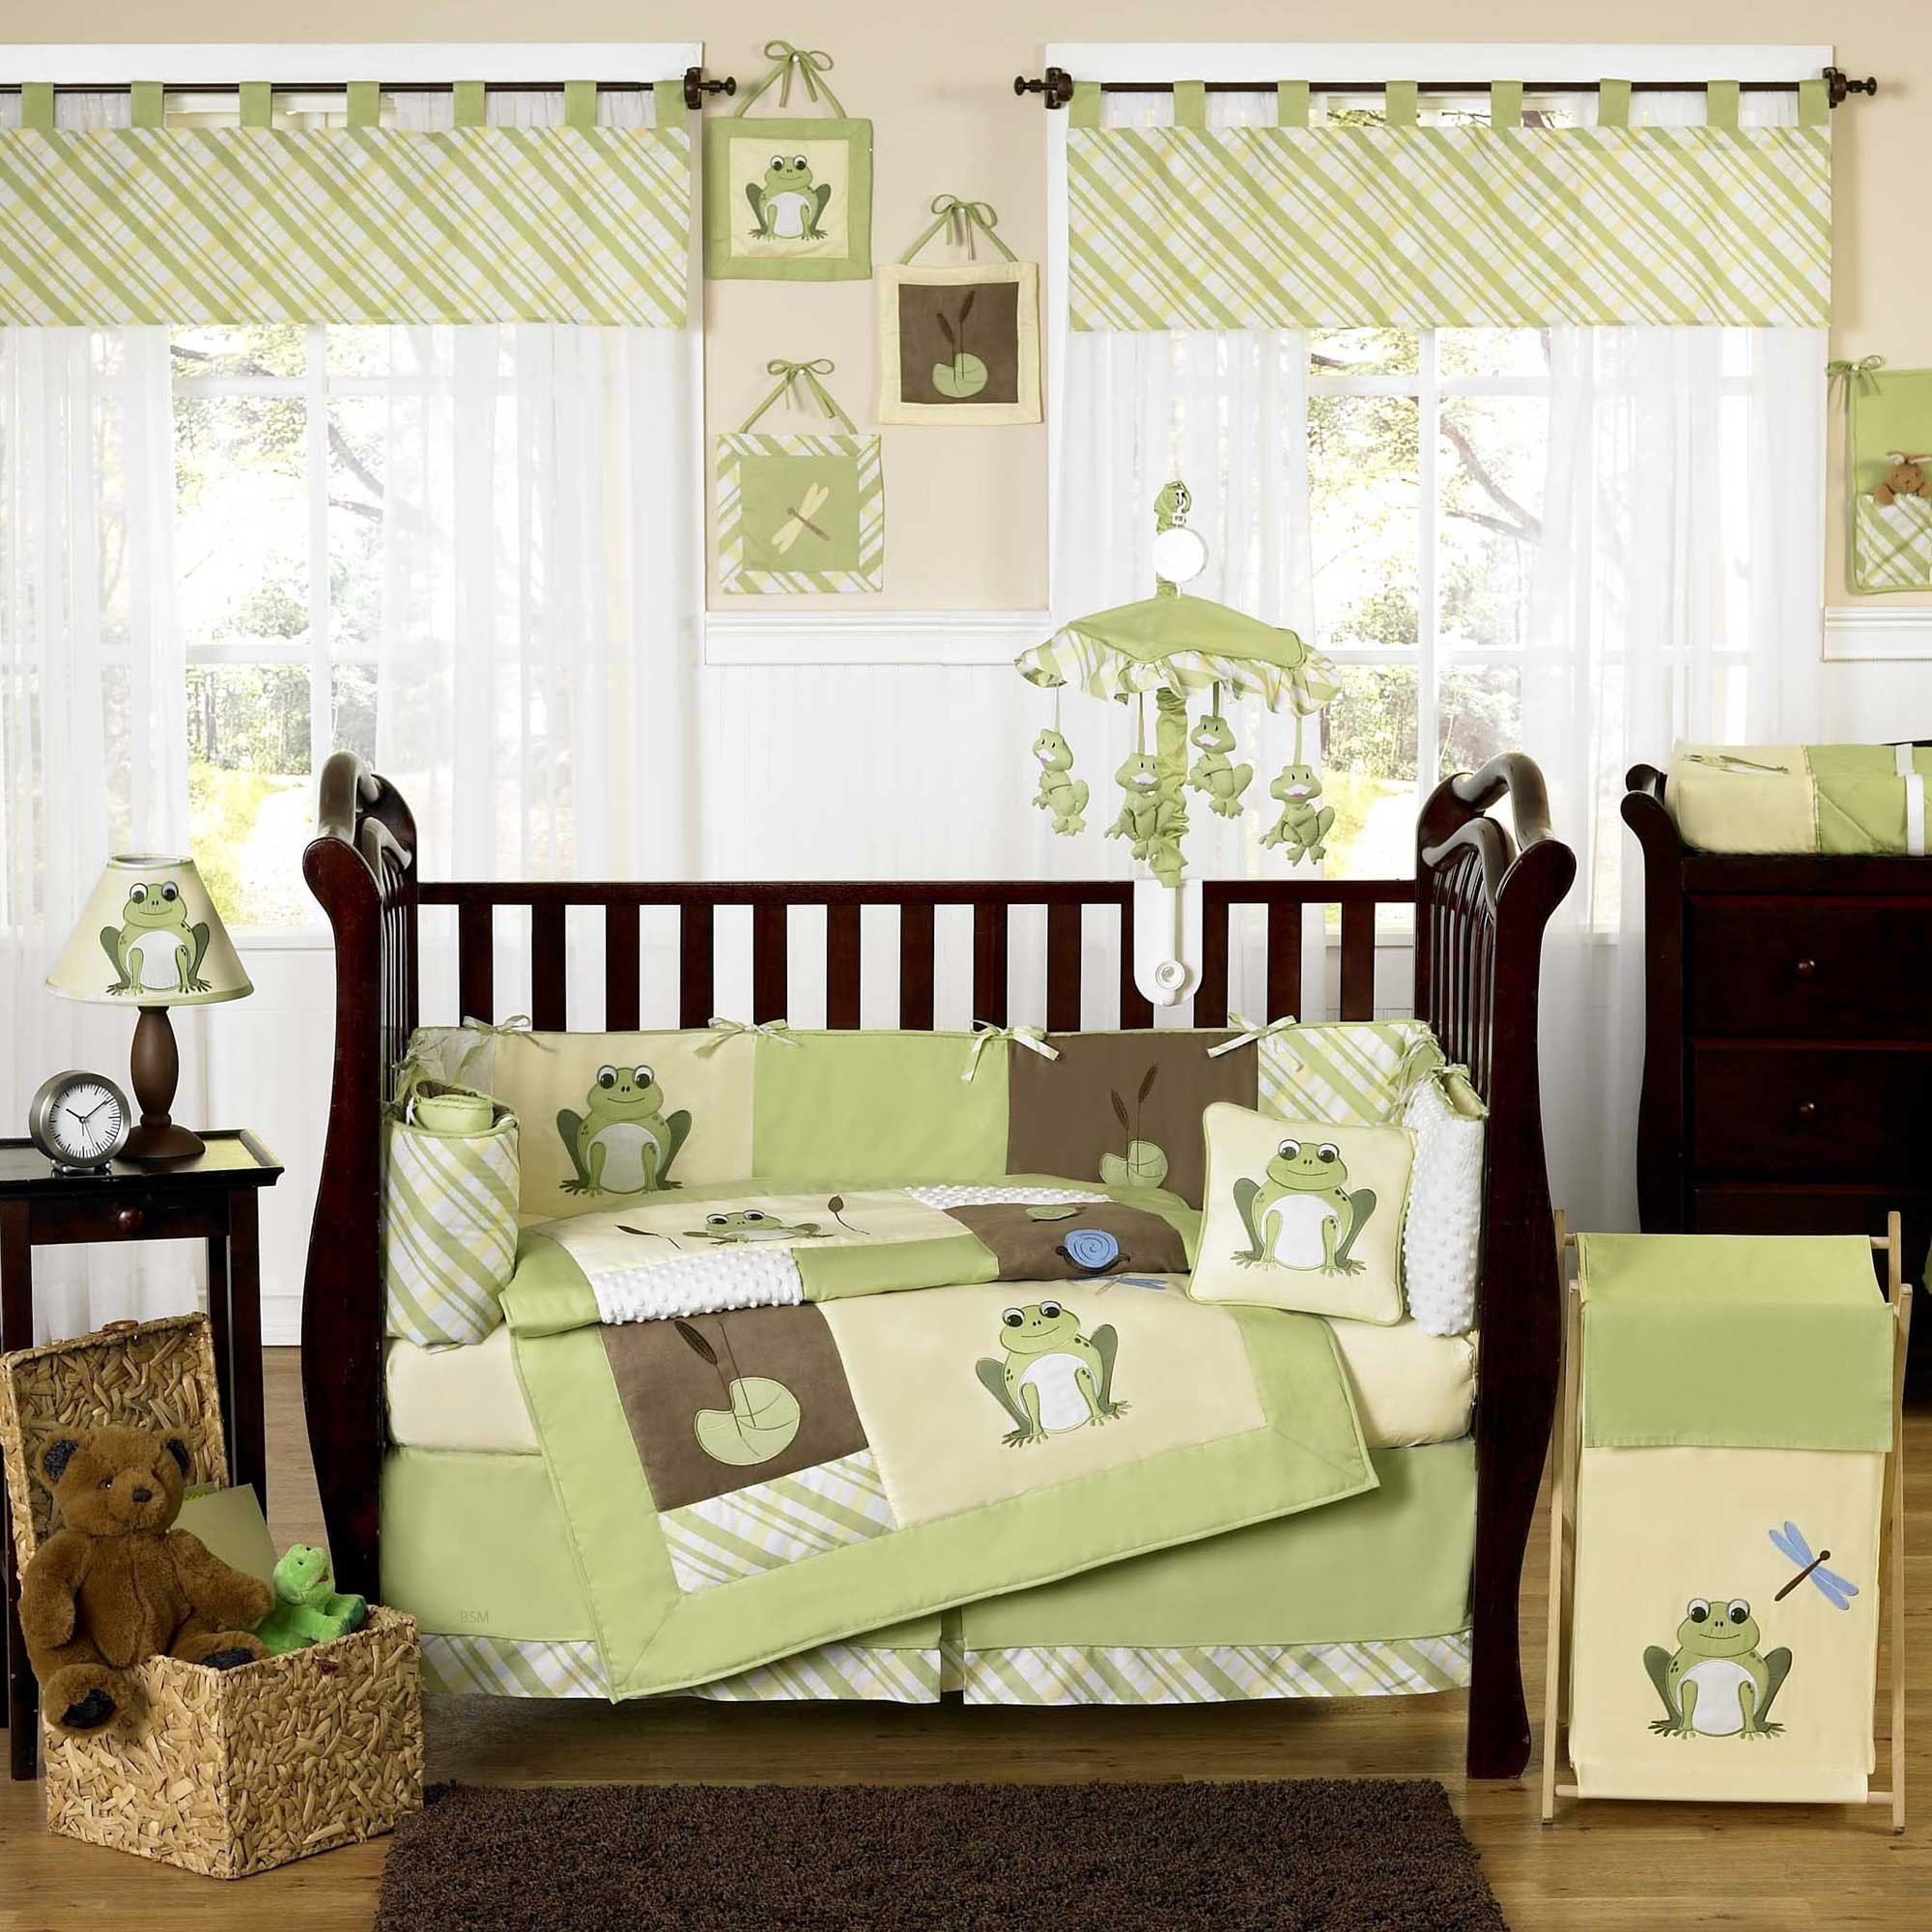 Newborn Baby Boy Room Decorating Ideas
 Themes For Baby Rooms Ideas – HomesFeed